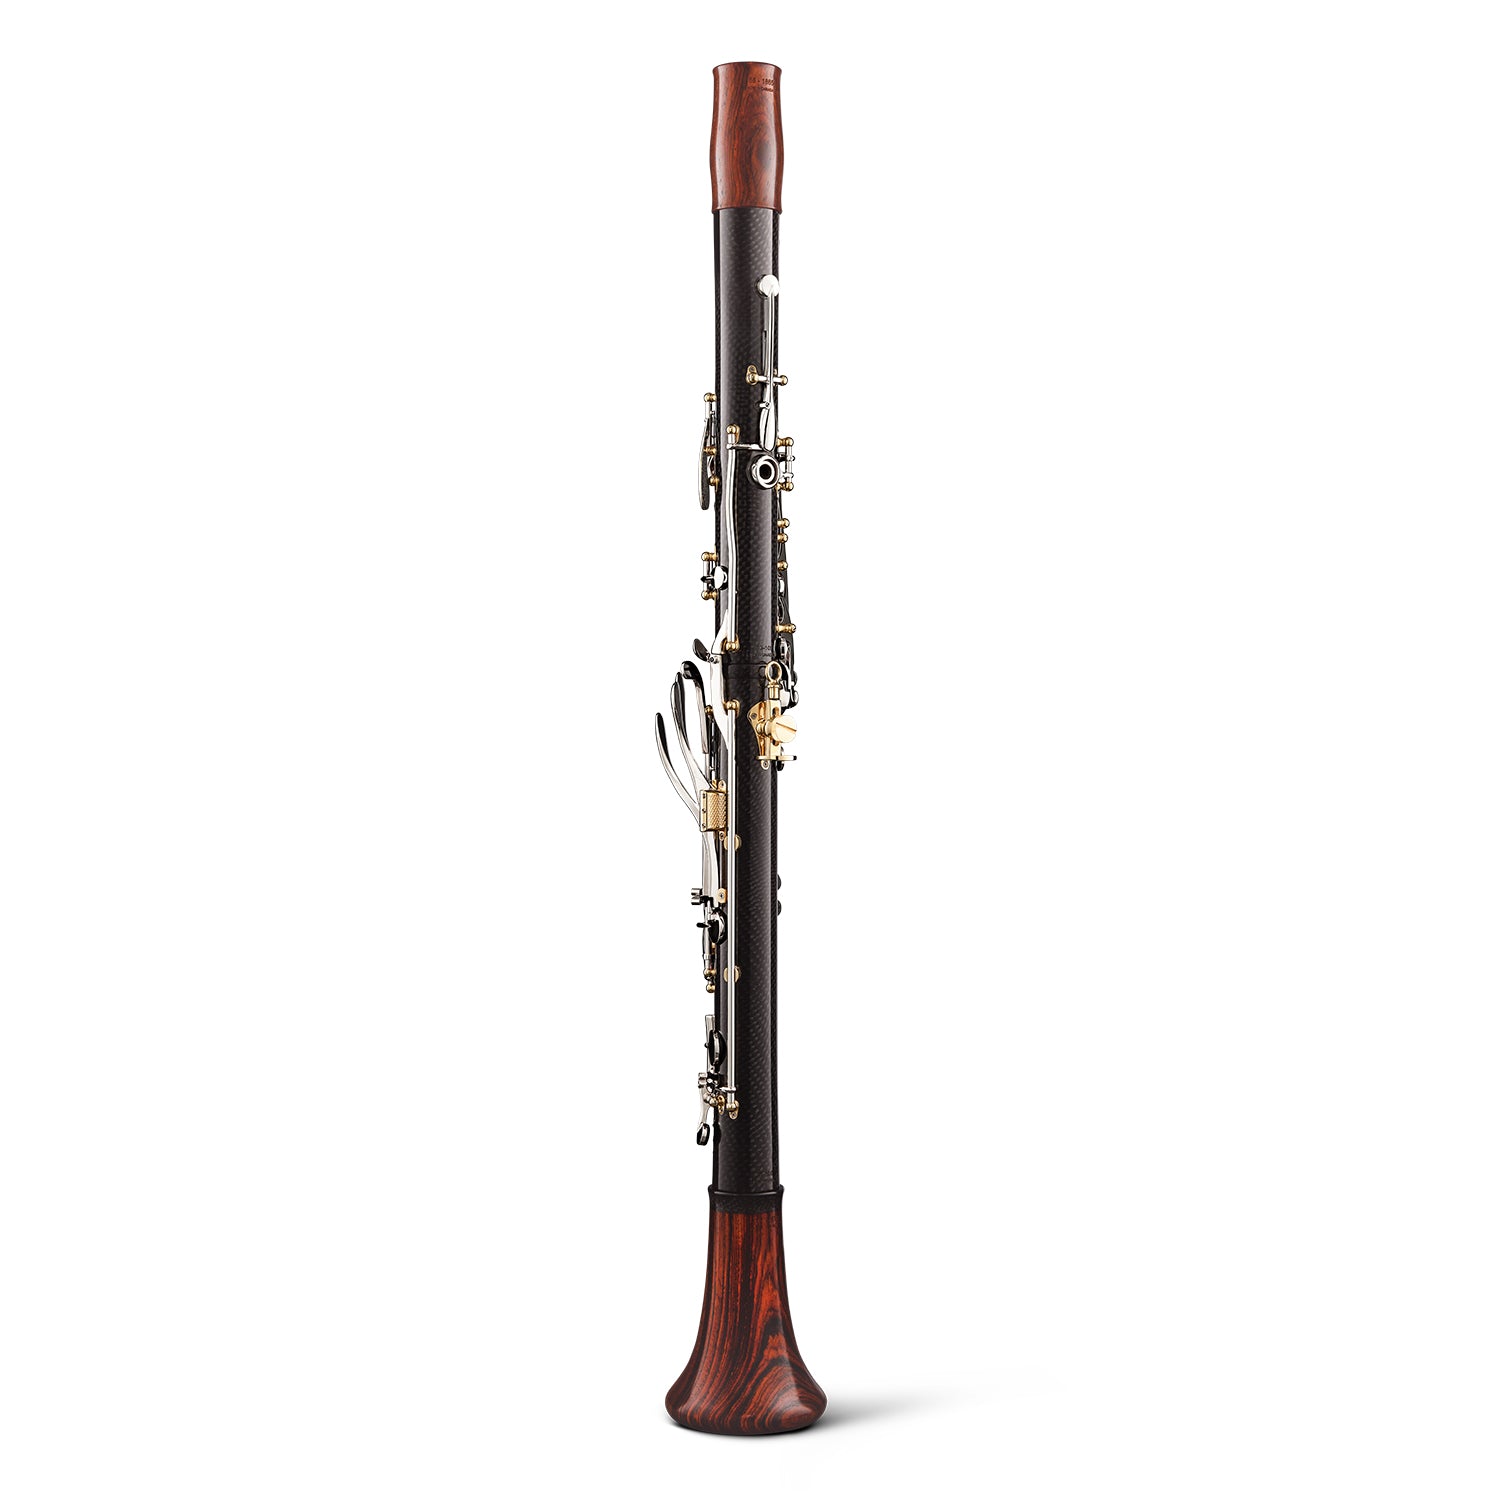 backun-a-clarinet-CG-carbon-cocobolo-silver-with-gold-posts-back